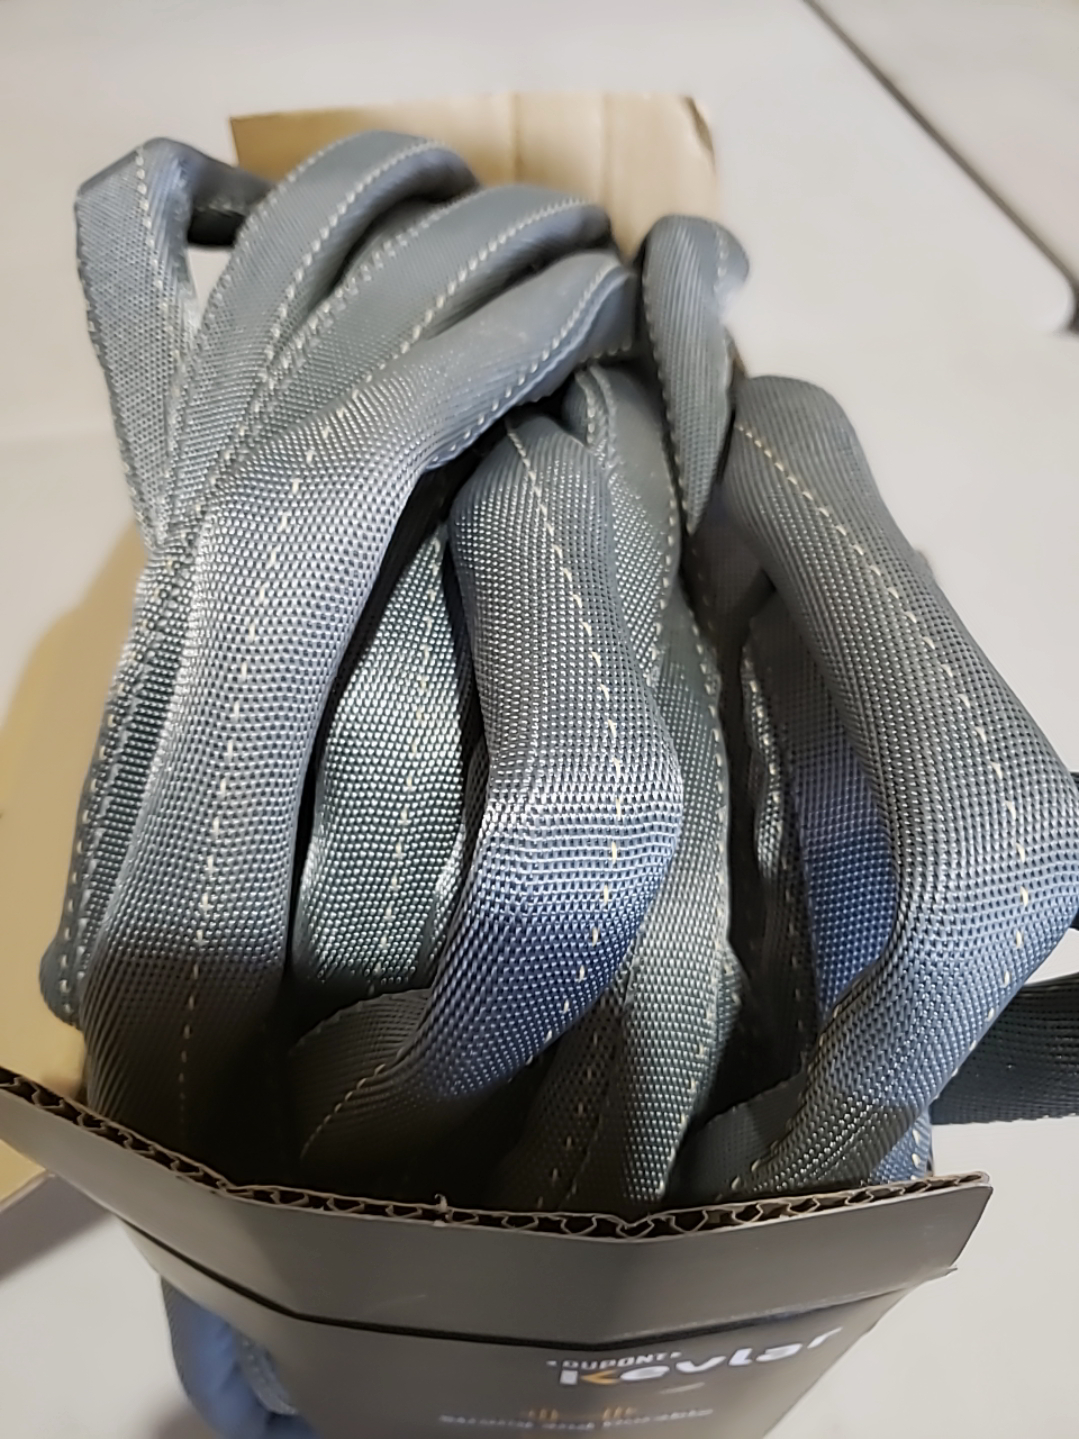 New Dupont Kevlar 60' Heavy Duty Hose - see photos for details